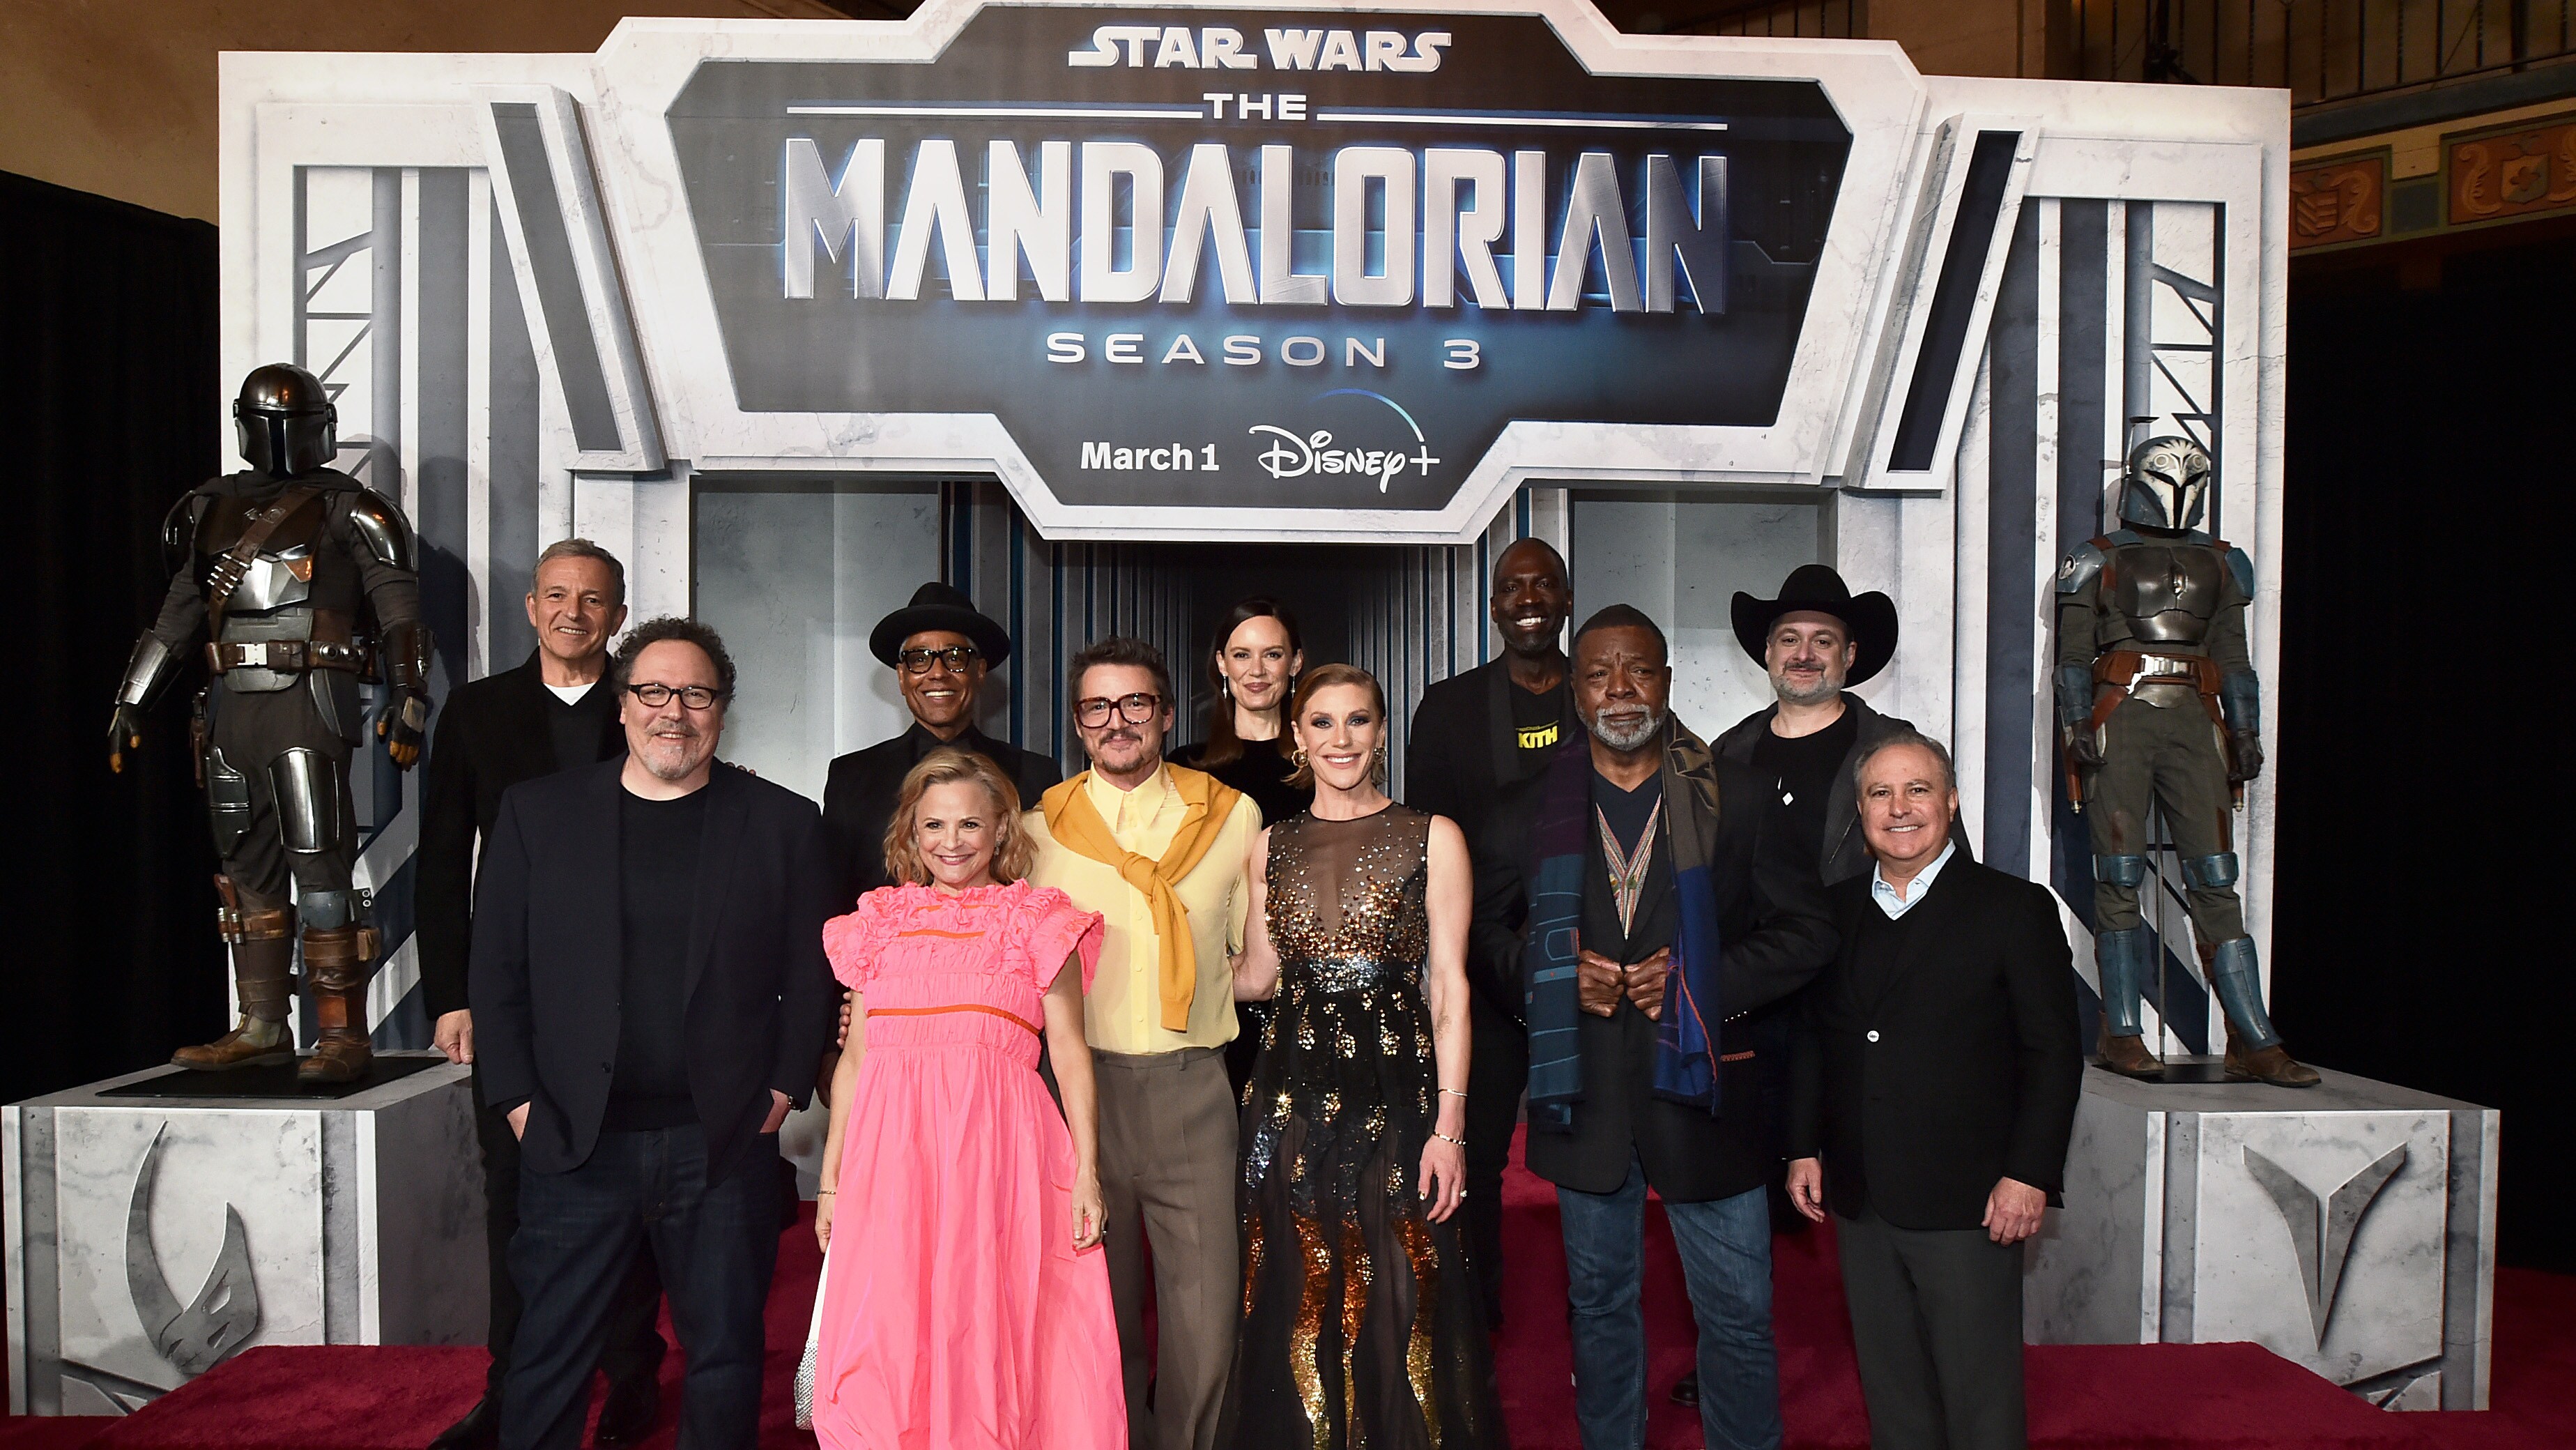 Disney+ Shares Photos From “The Mandalorian” Special Launch Event 